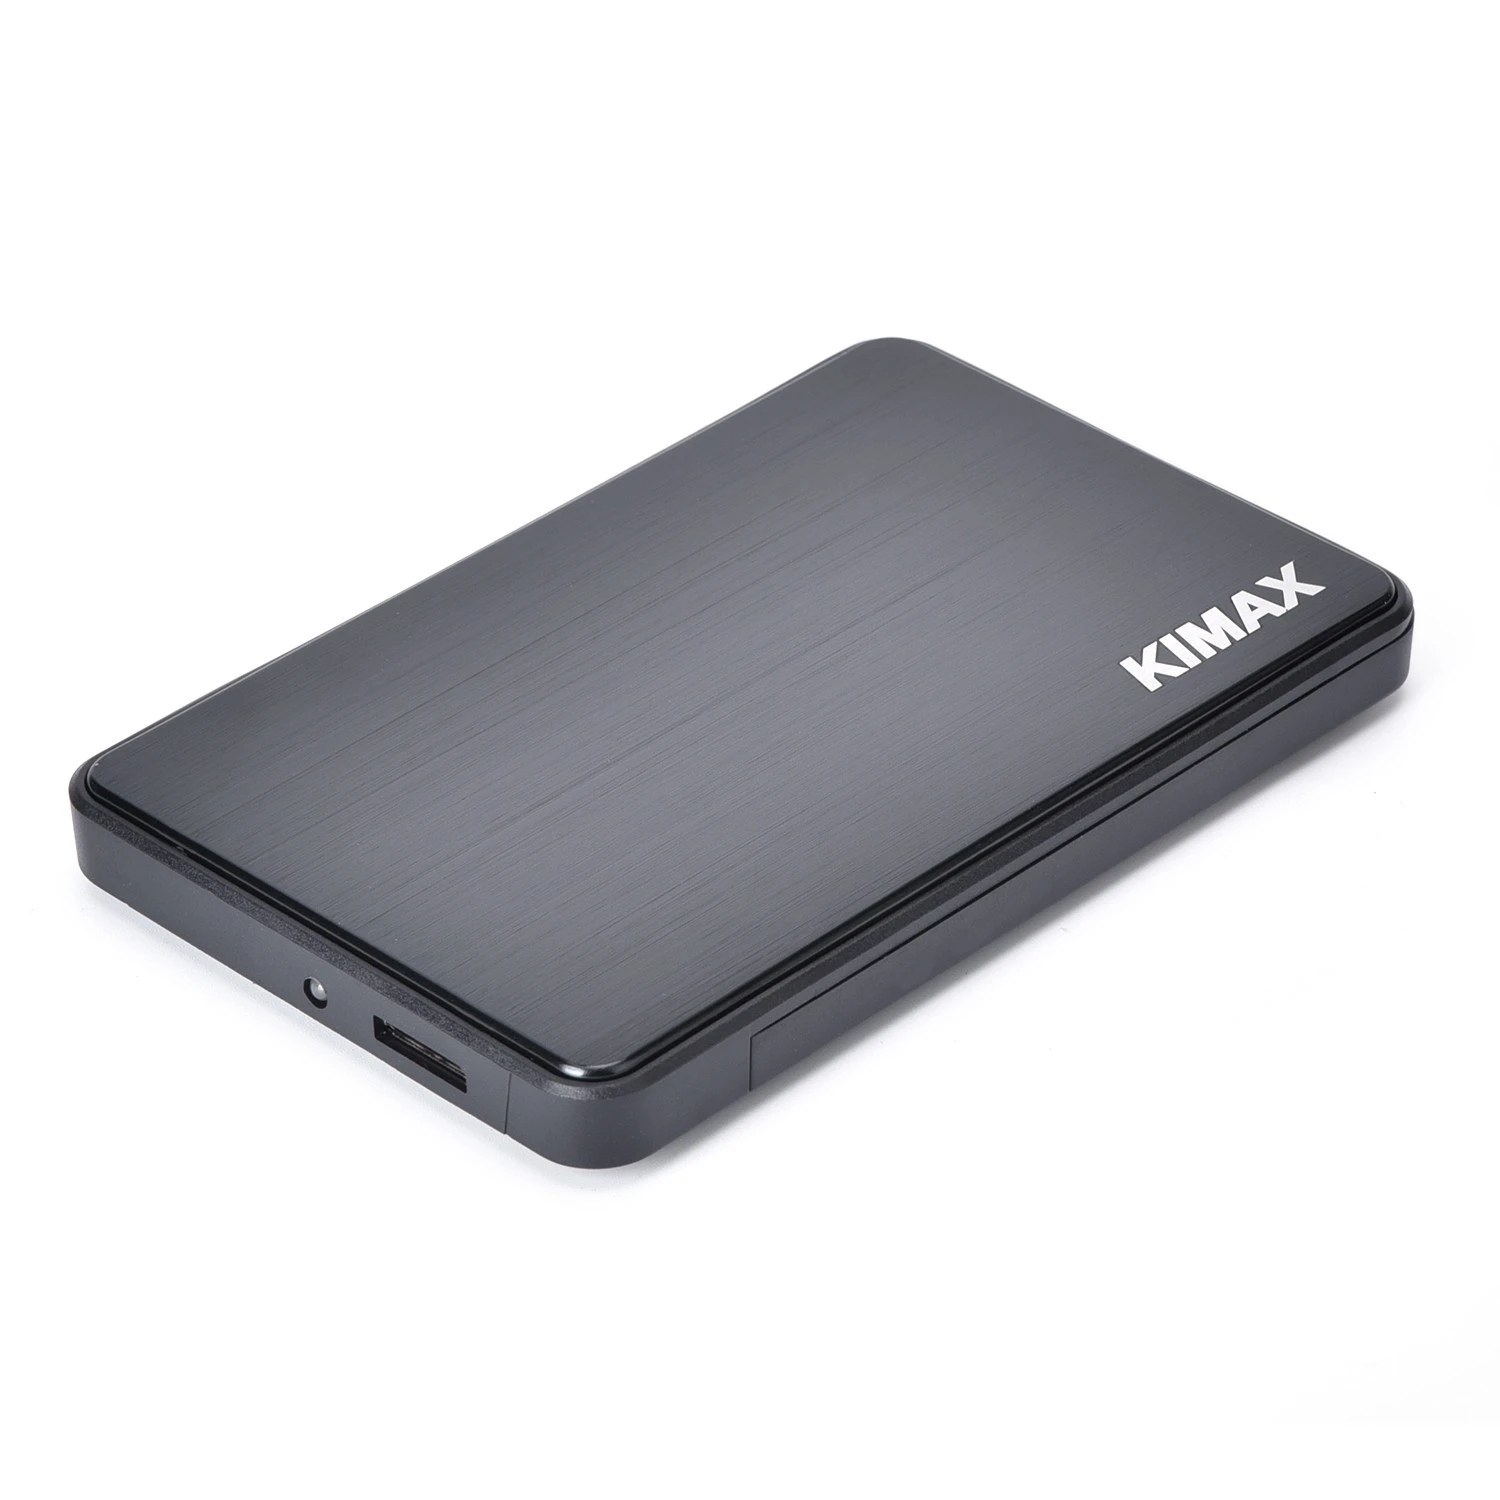 USB 3.0 to SATA External Hard Drive Enclosure Tool-Free for 2.5-Inch 9.5mm 7mm HDD and SSD Drive case UASP Supported